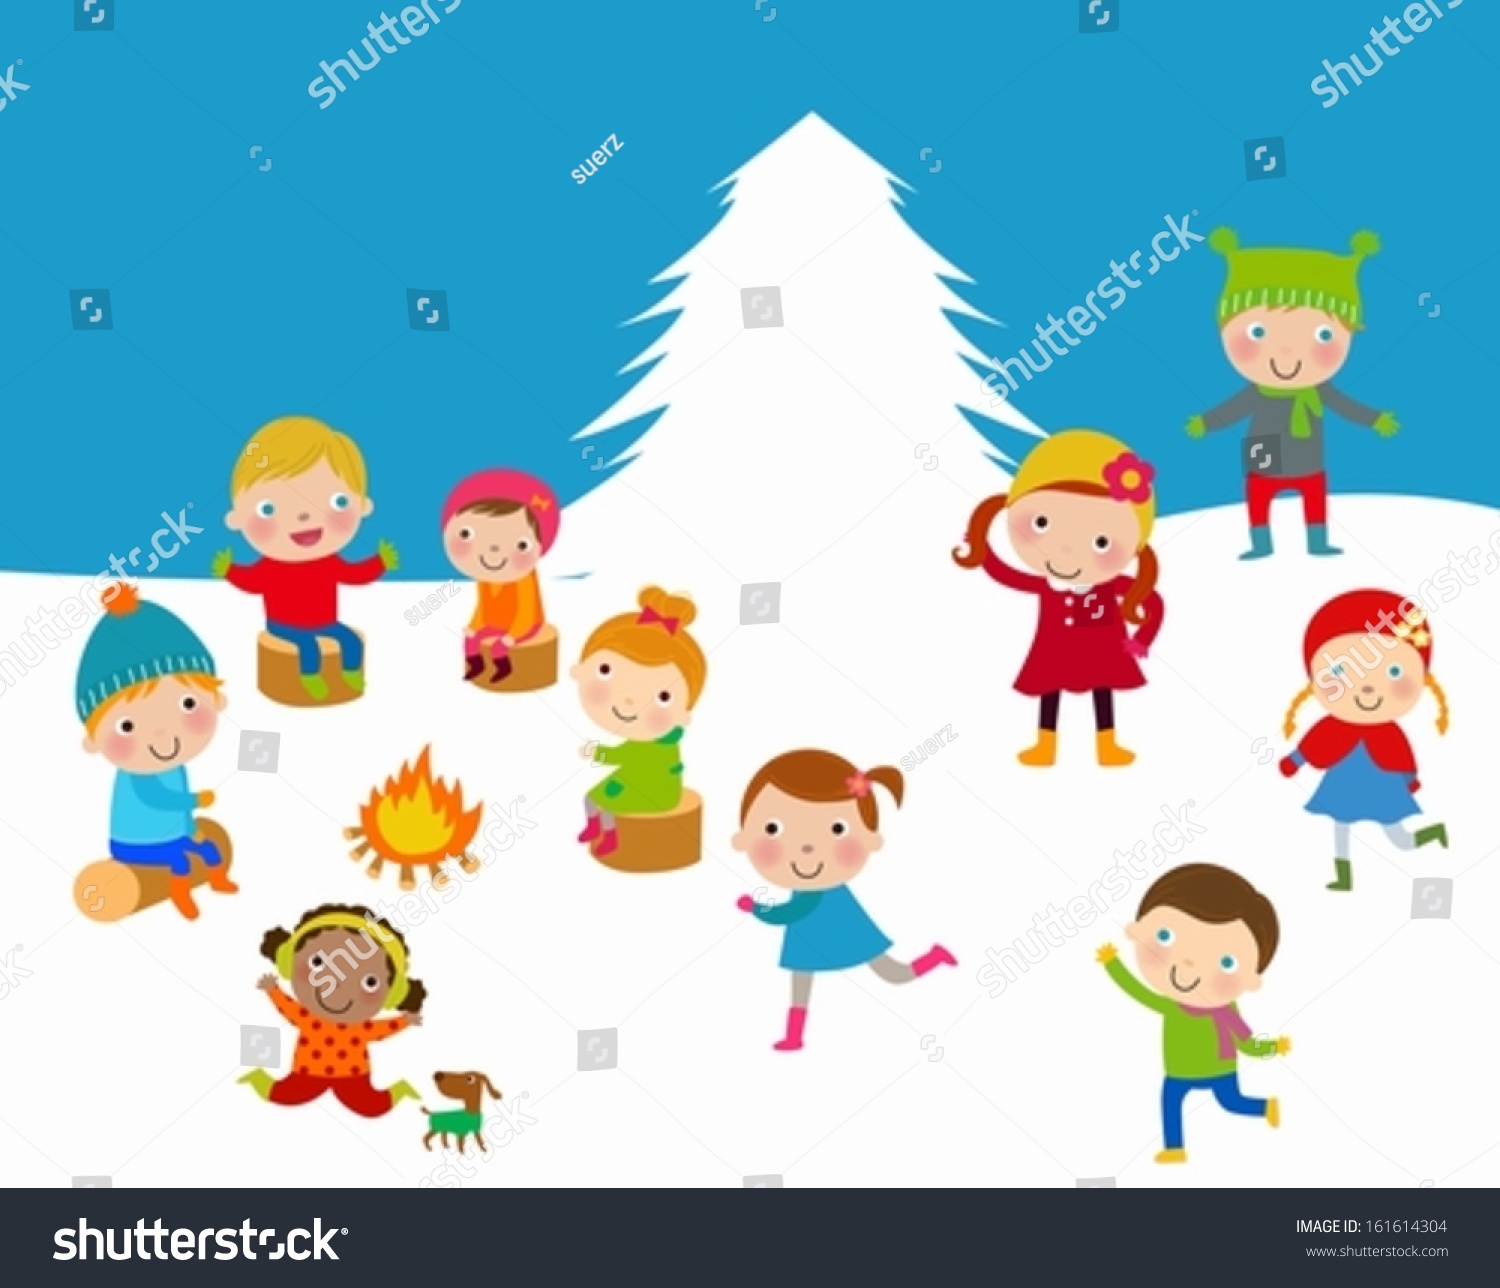 winter games clipart - photo #1